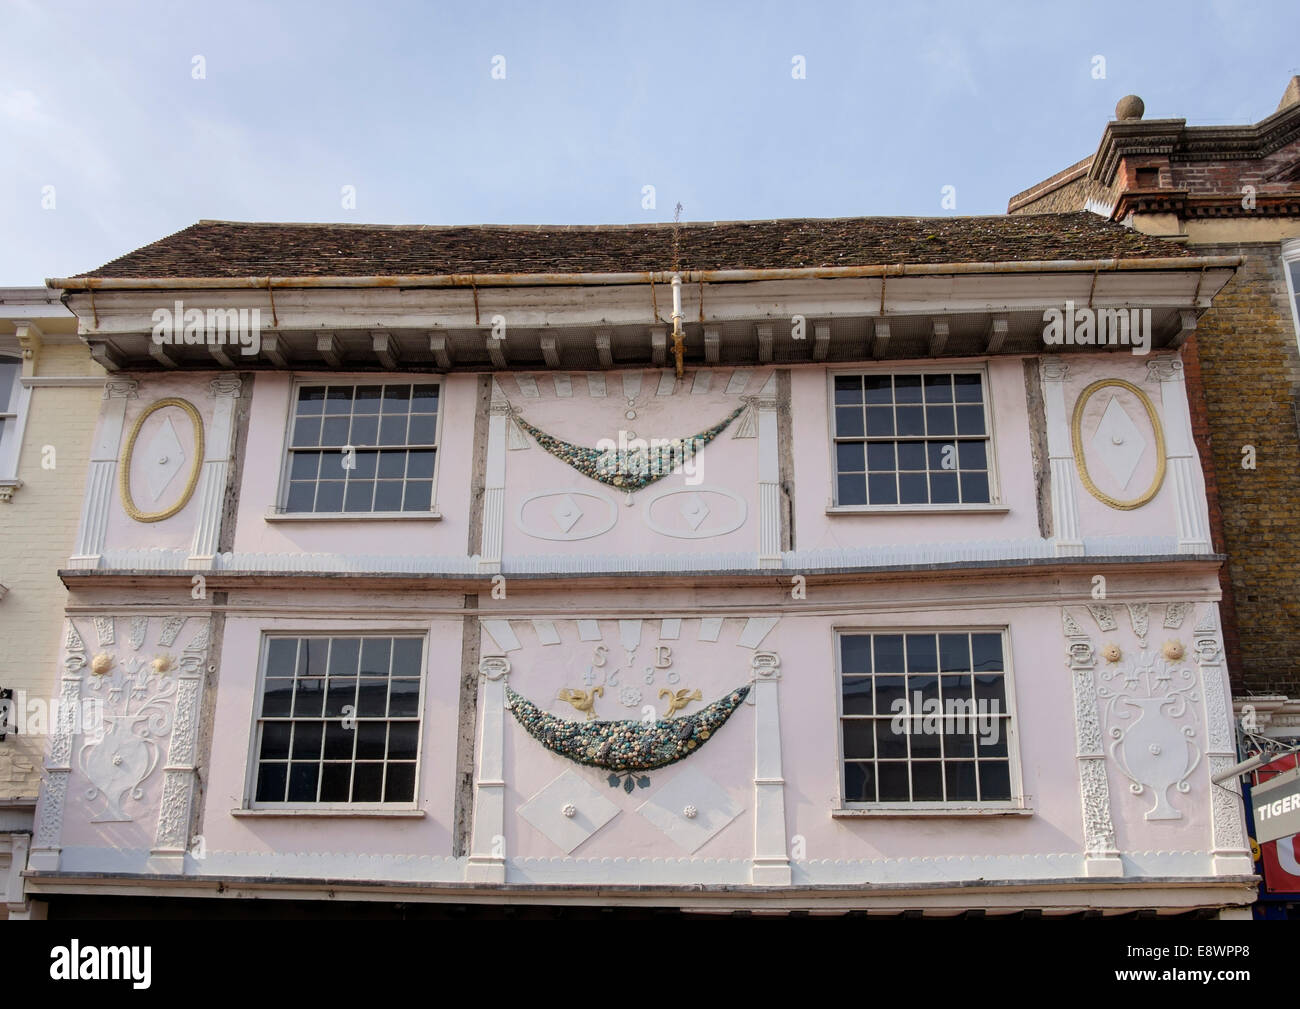 Ornate facade on 17th century building circa 1680 in the town centre of Maidstone, Kent, England, UK, Britain Stock Photo